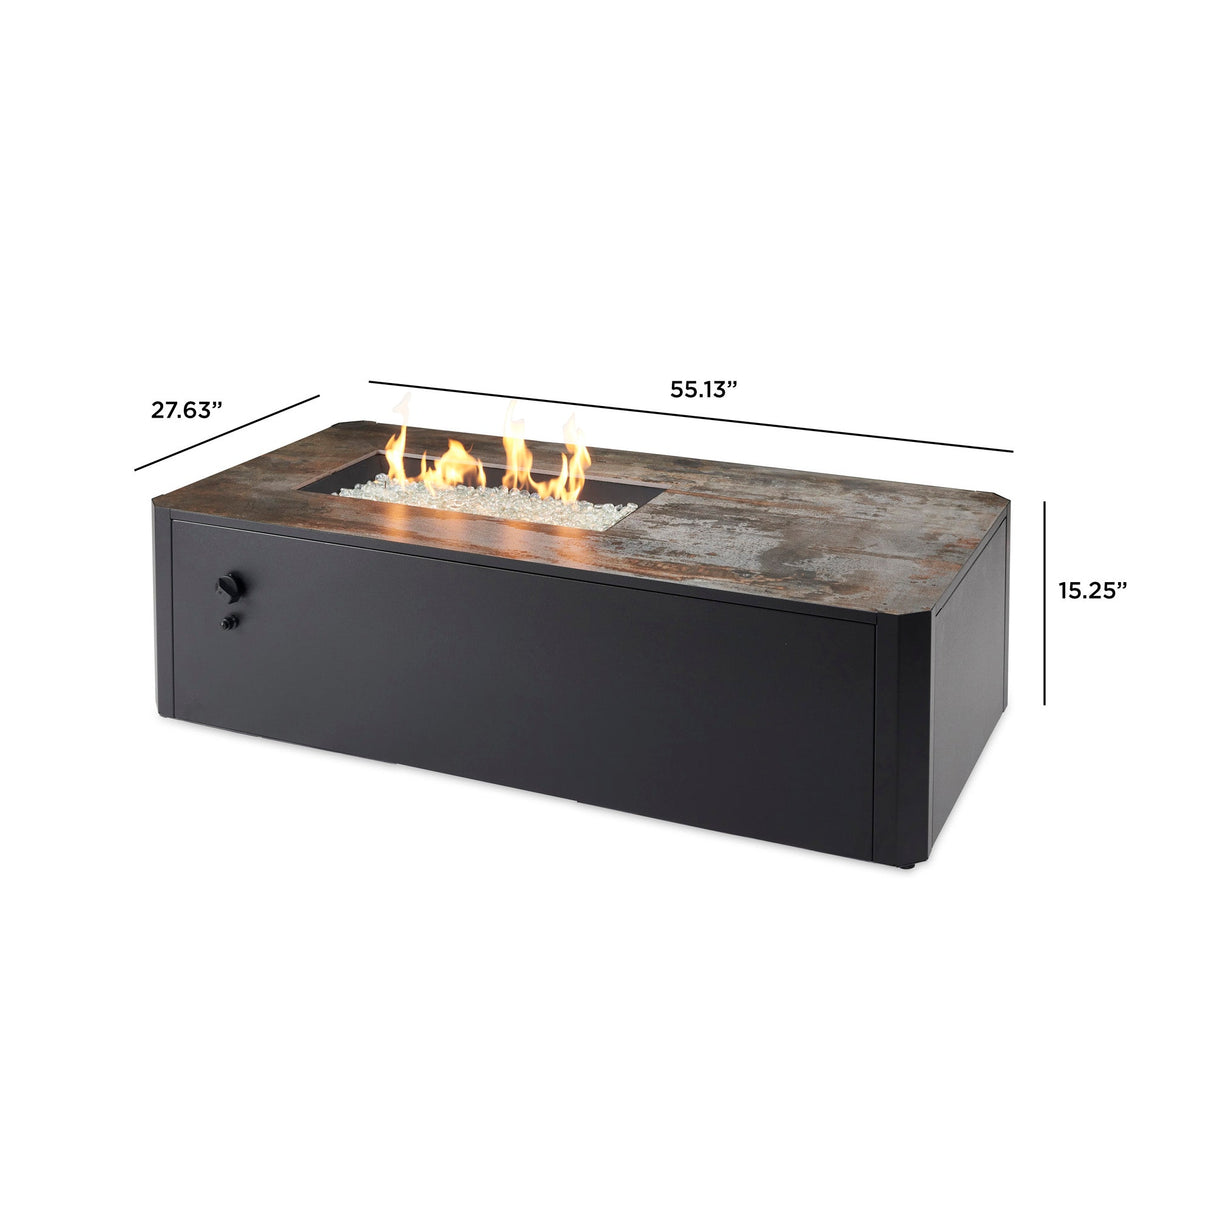 Dimensions overlaid on the Kinney Rectangular Gas Fire Pit Table